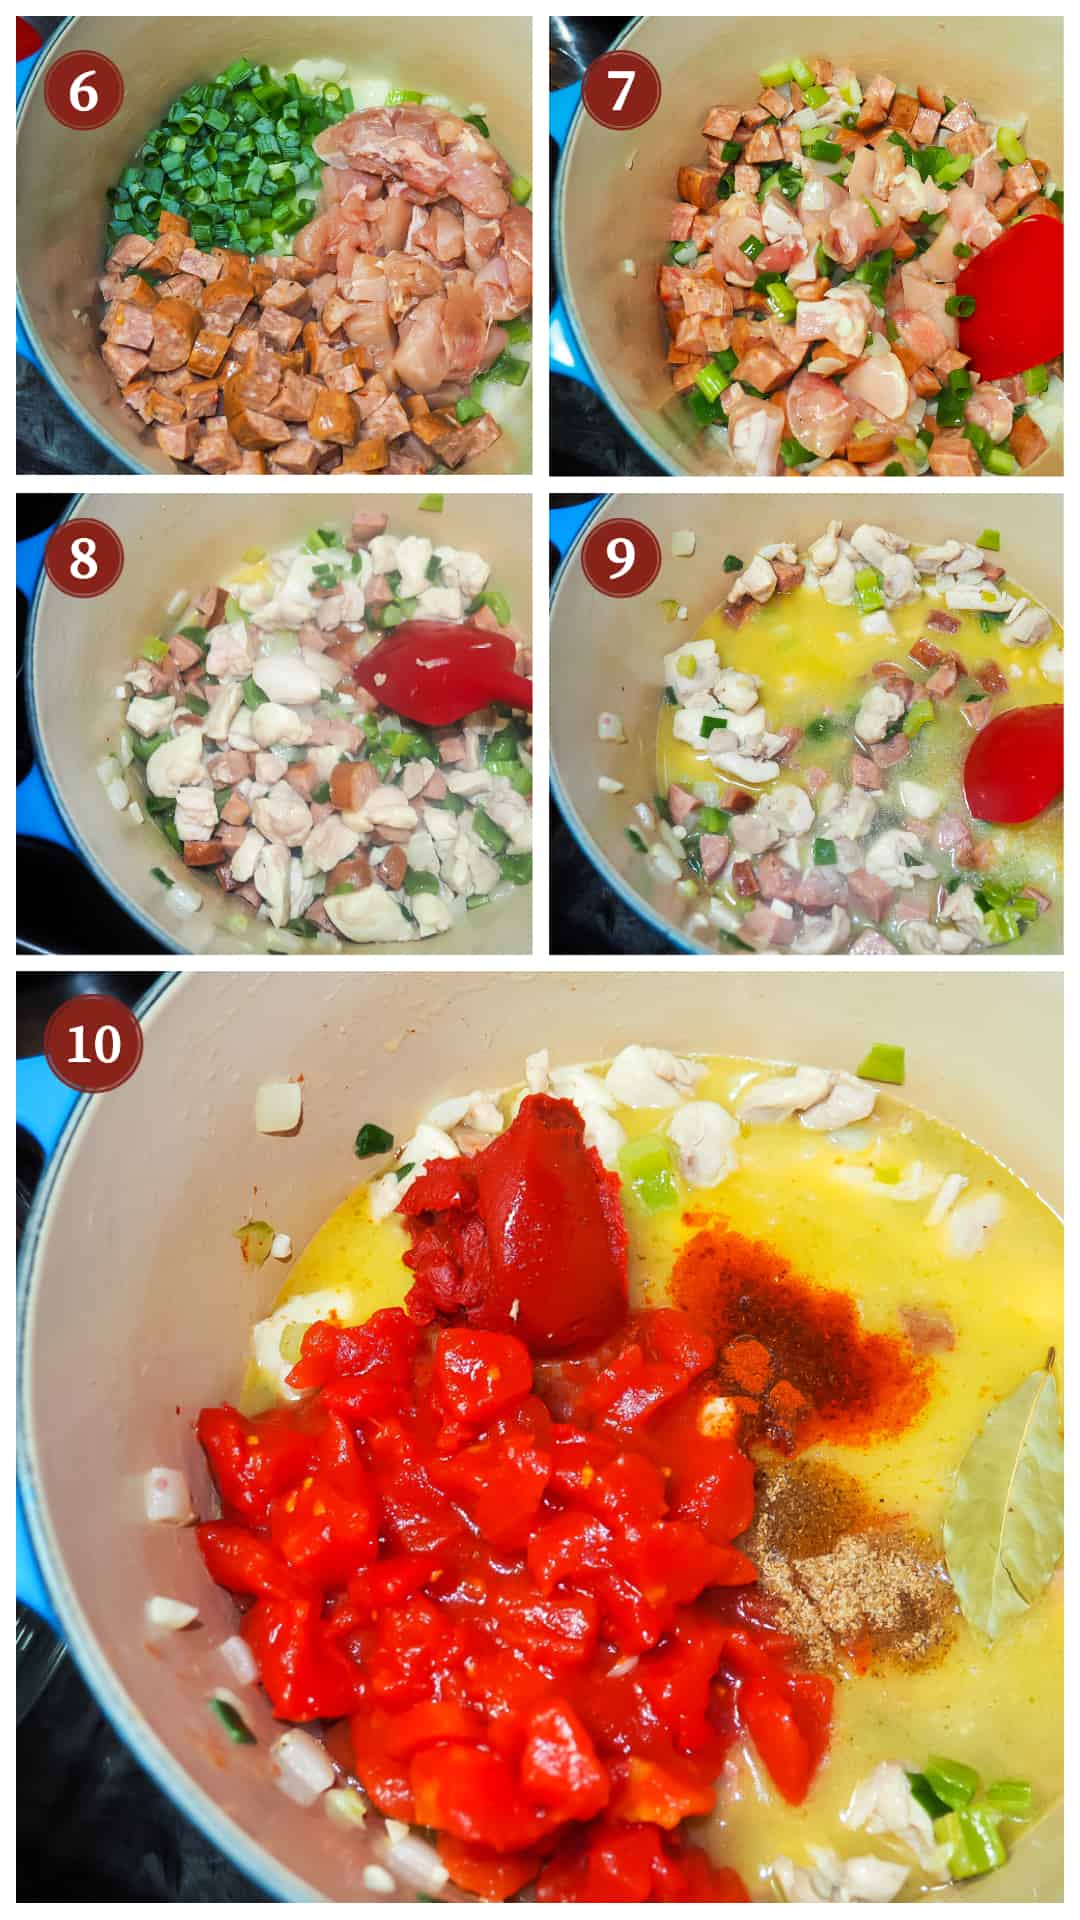 a process collage of images for making jambalaya, steps 6 - 10.